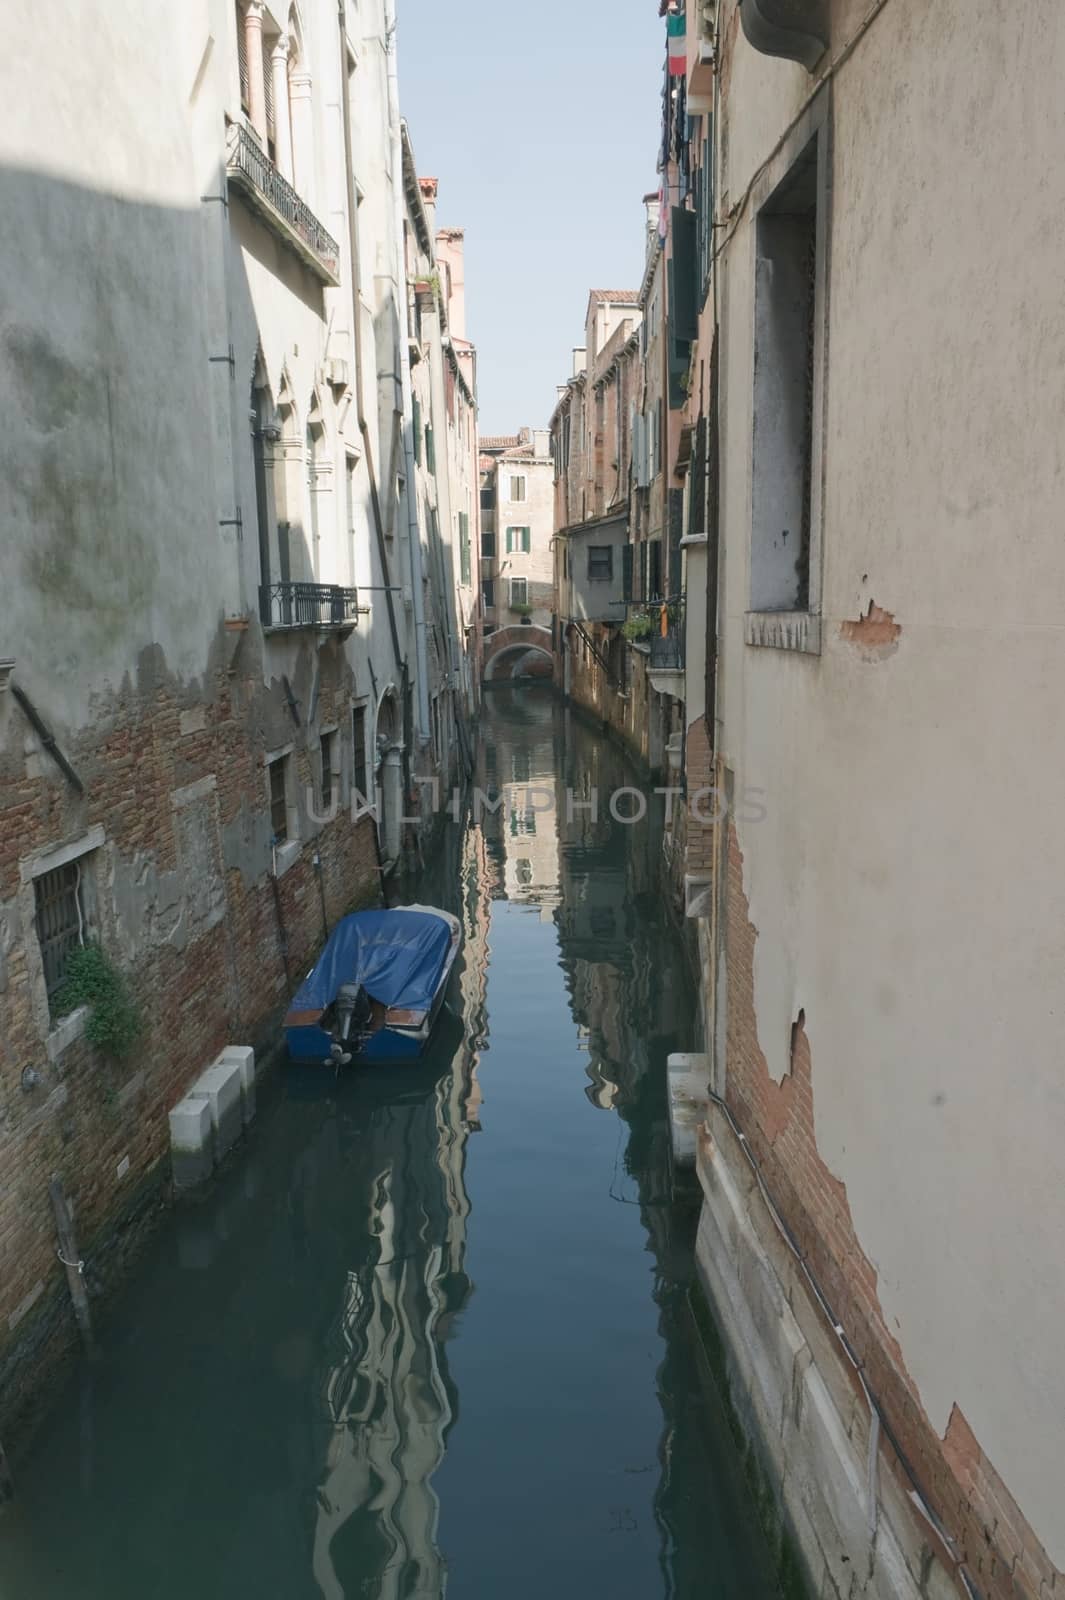 Narrow Venetian canal with a boat and reflections